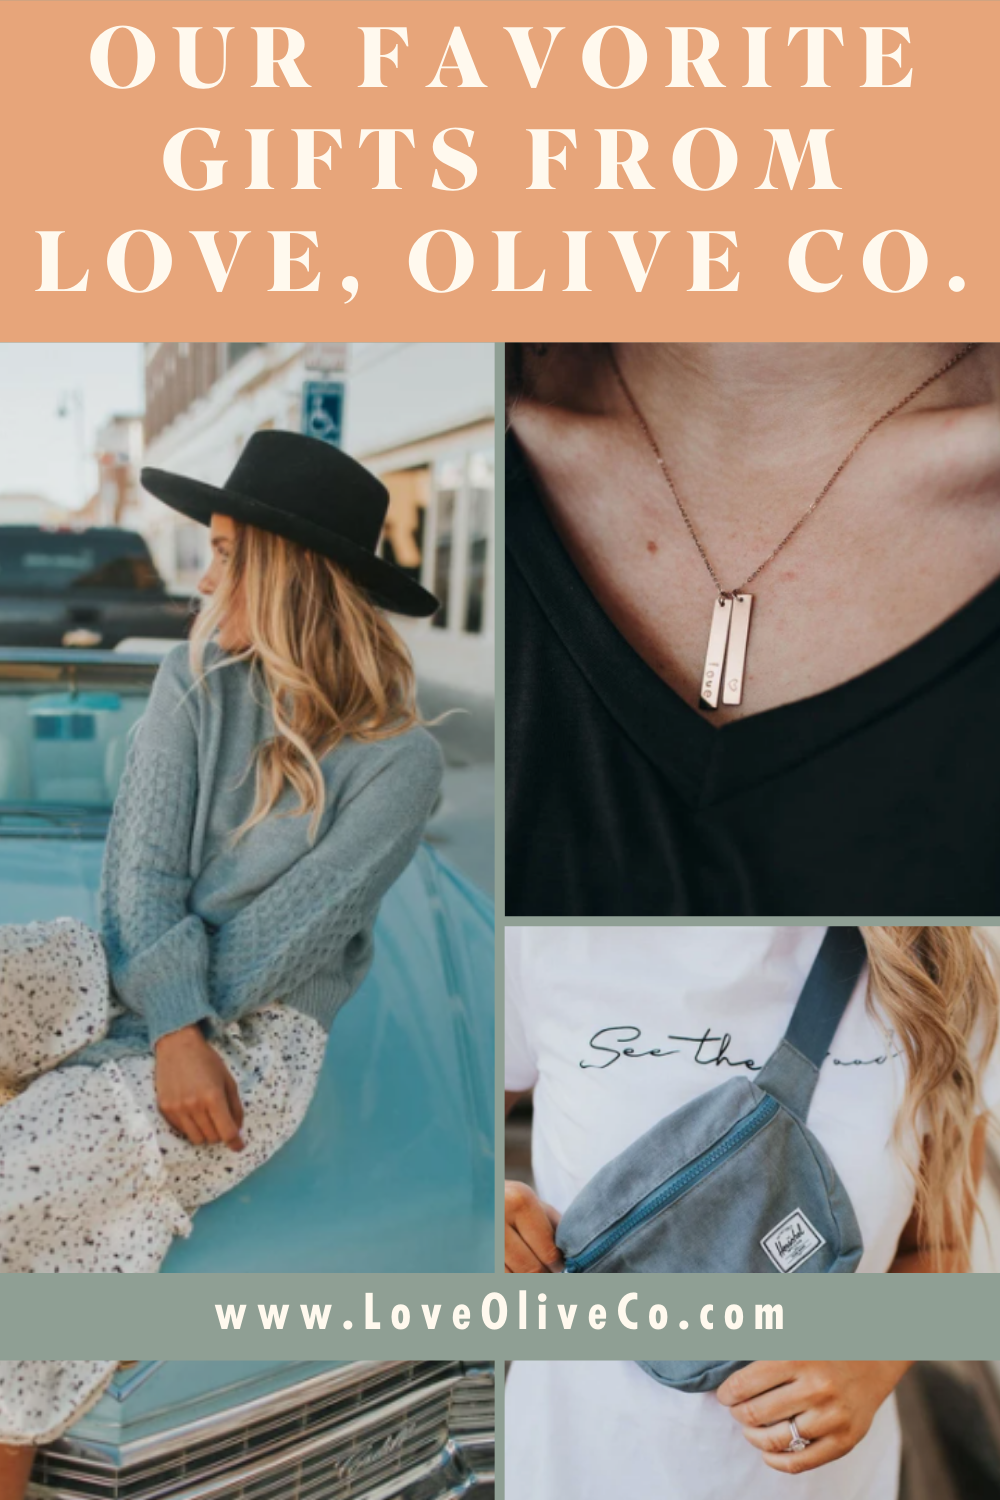 Our favorite gifts from Love, Olive Co.! Get her the gifts she really wants this year. www.www.loveoliveshop.com/blogs